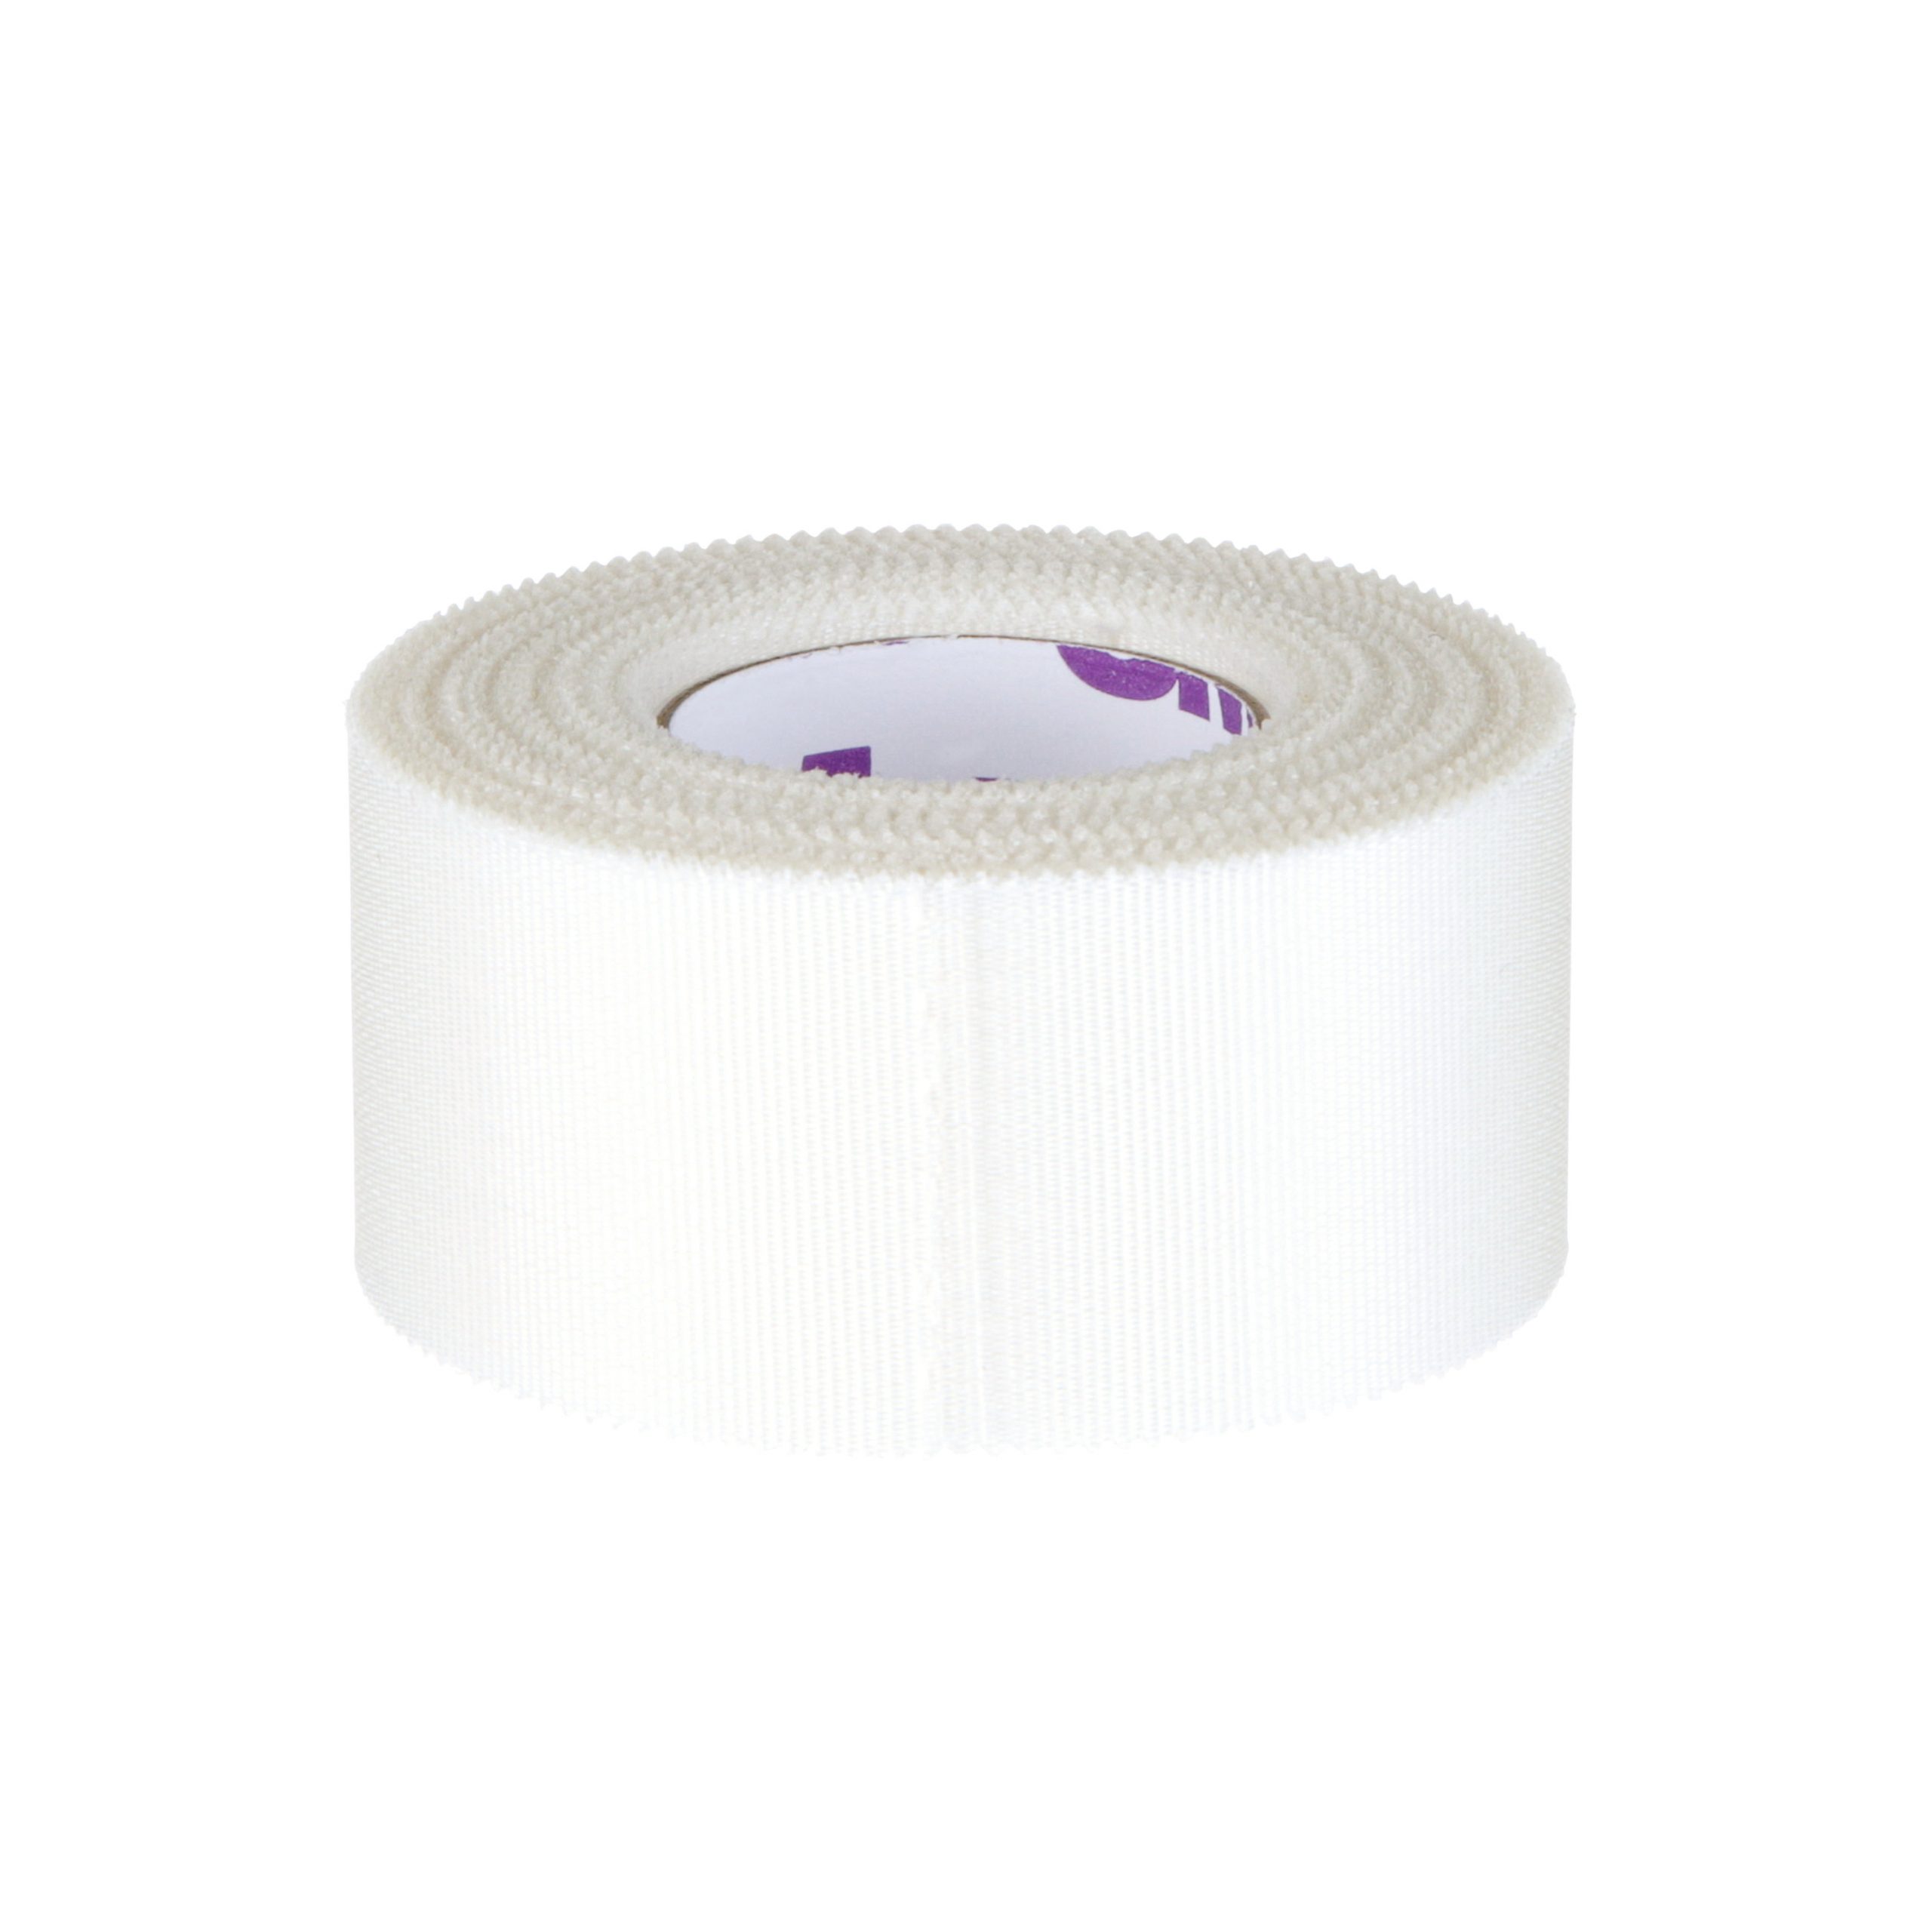 3m durapore medical tape, 3m durapore medical tape Suppliers and  Manufacturers at